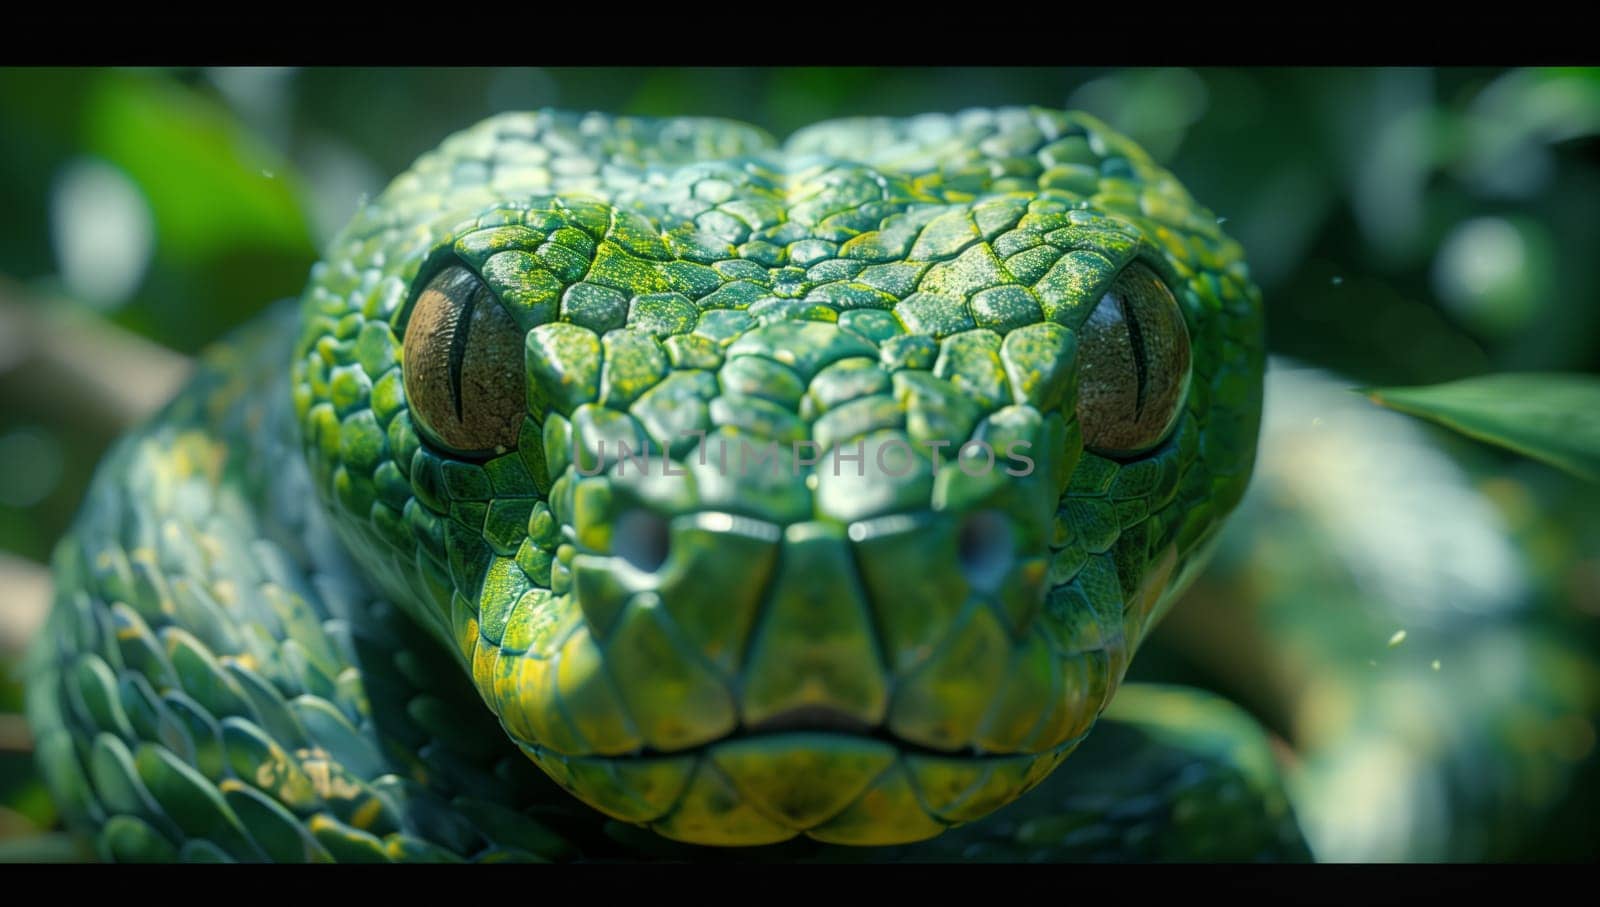 Close up of a green scaled reptile eyeing the camera in macro photography by richwolf